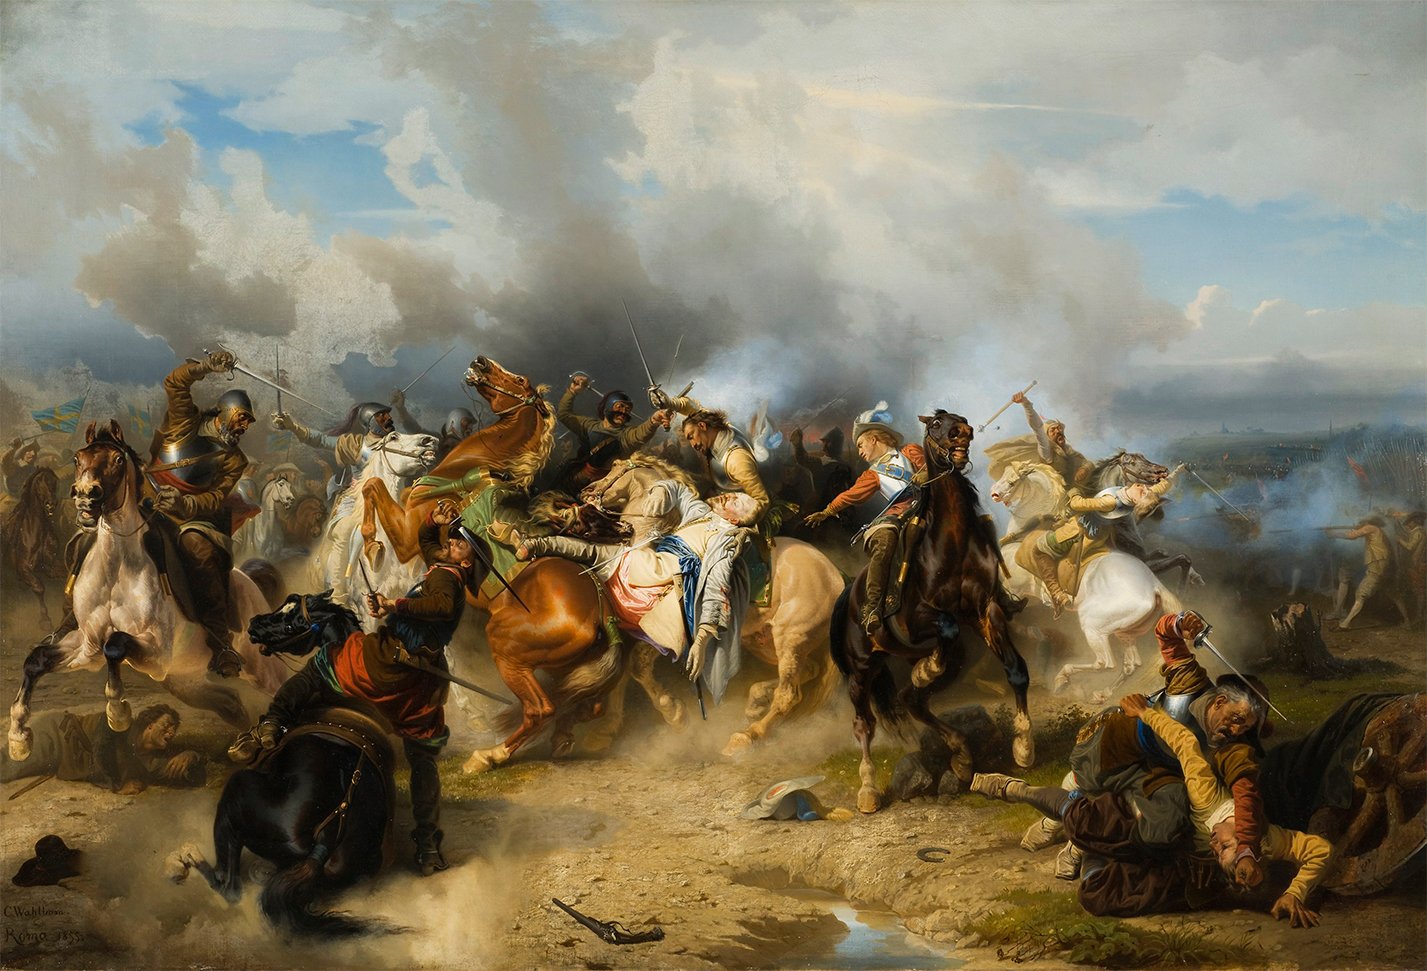 The artwork captures the fateful moment on November 6, 1632, when Swedish King Gustav II Adolf is fatally wounded at the Battle of Lützen. His luminous body seems to be slipping off his horse, but is caught by a shocked Swedish soldier. While the king is depicted as both a hero and a martyr, evoking imagery commonly associated with depictions of the deceased Christ, the artist Wahlbom also showcases his expertise in painting horses, capturing them in various poses and lighting conditions.